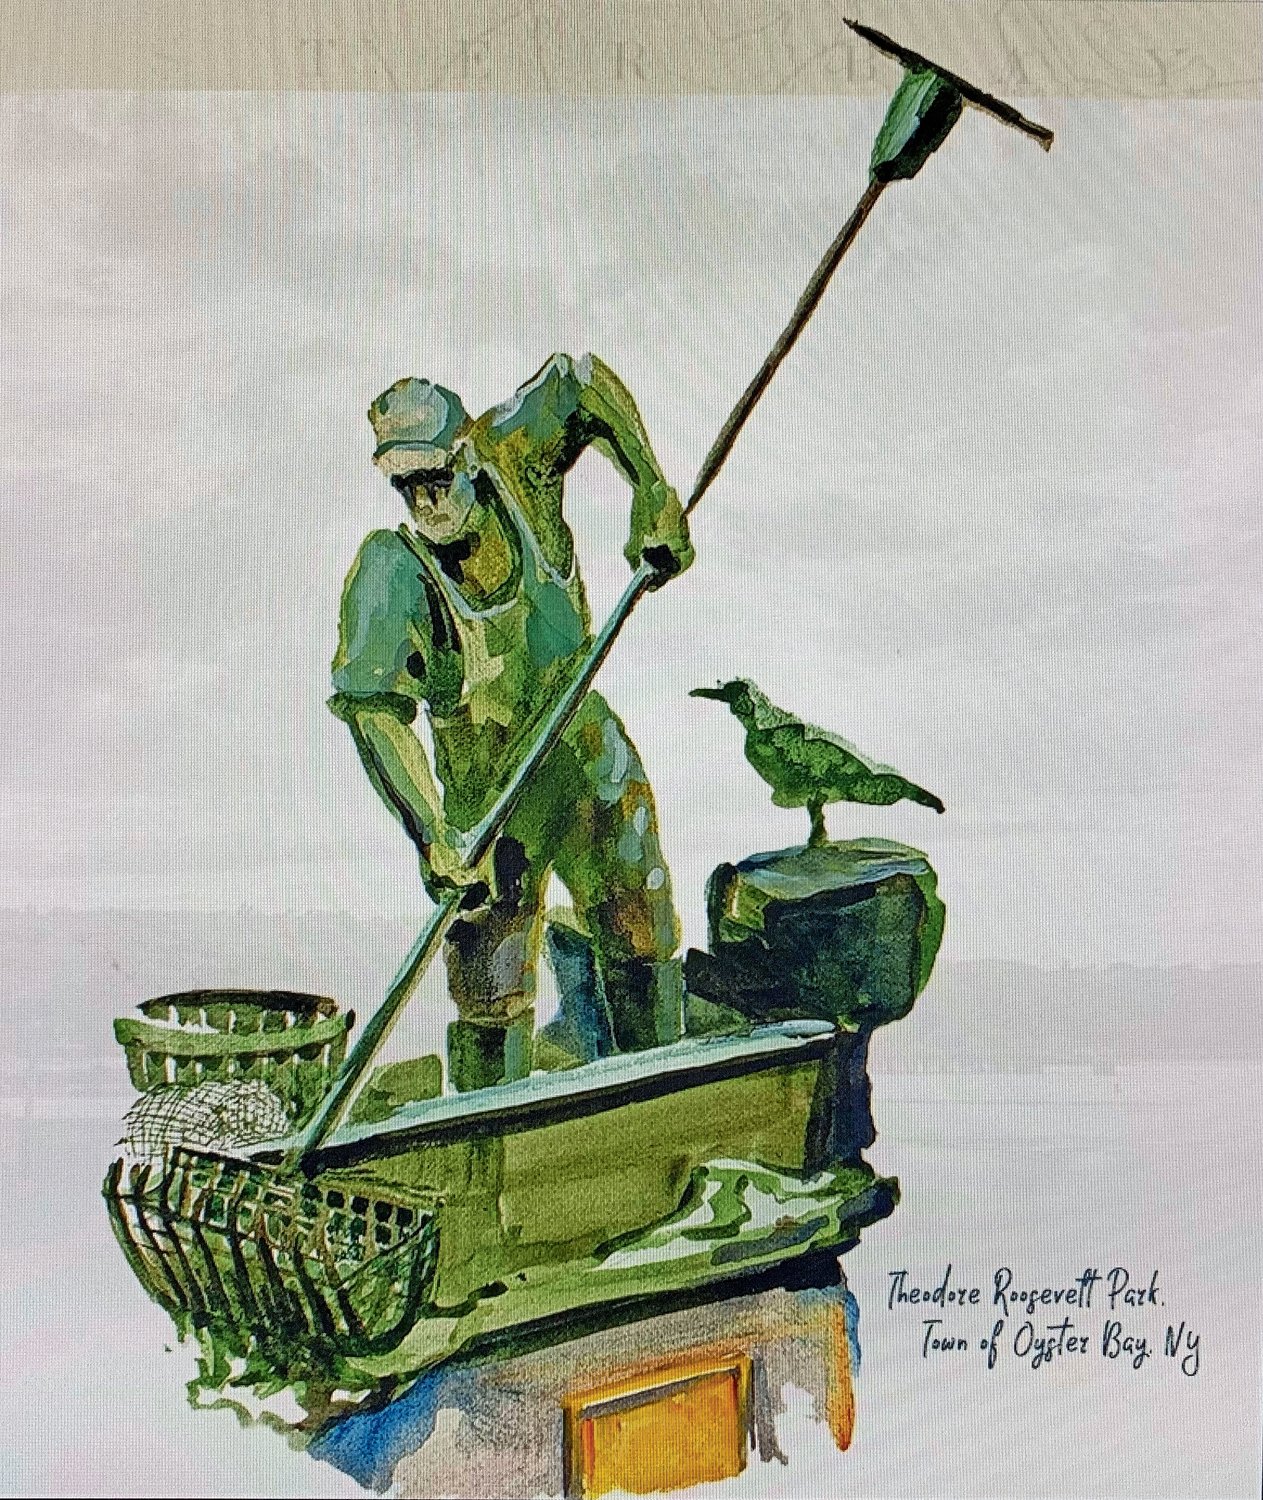 A watercolor created by Kirk Larsen, of the monument — a bayman clamming — was shared at the Town of Oyster Bay meeting on May 11.